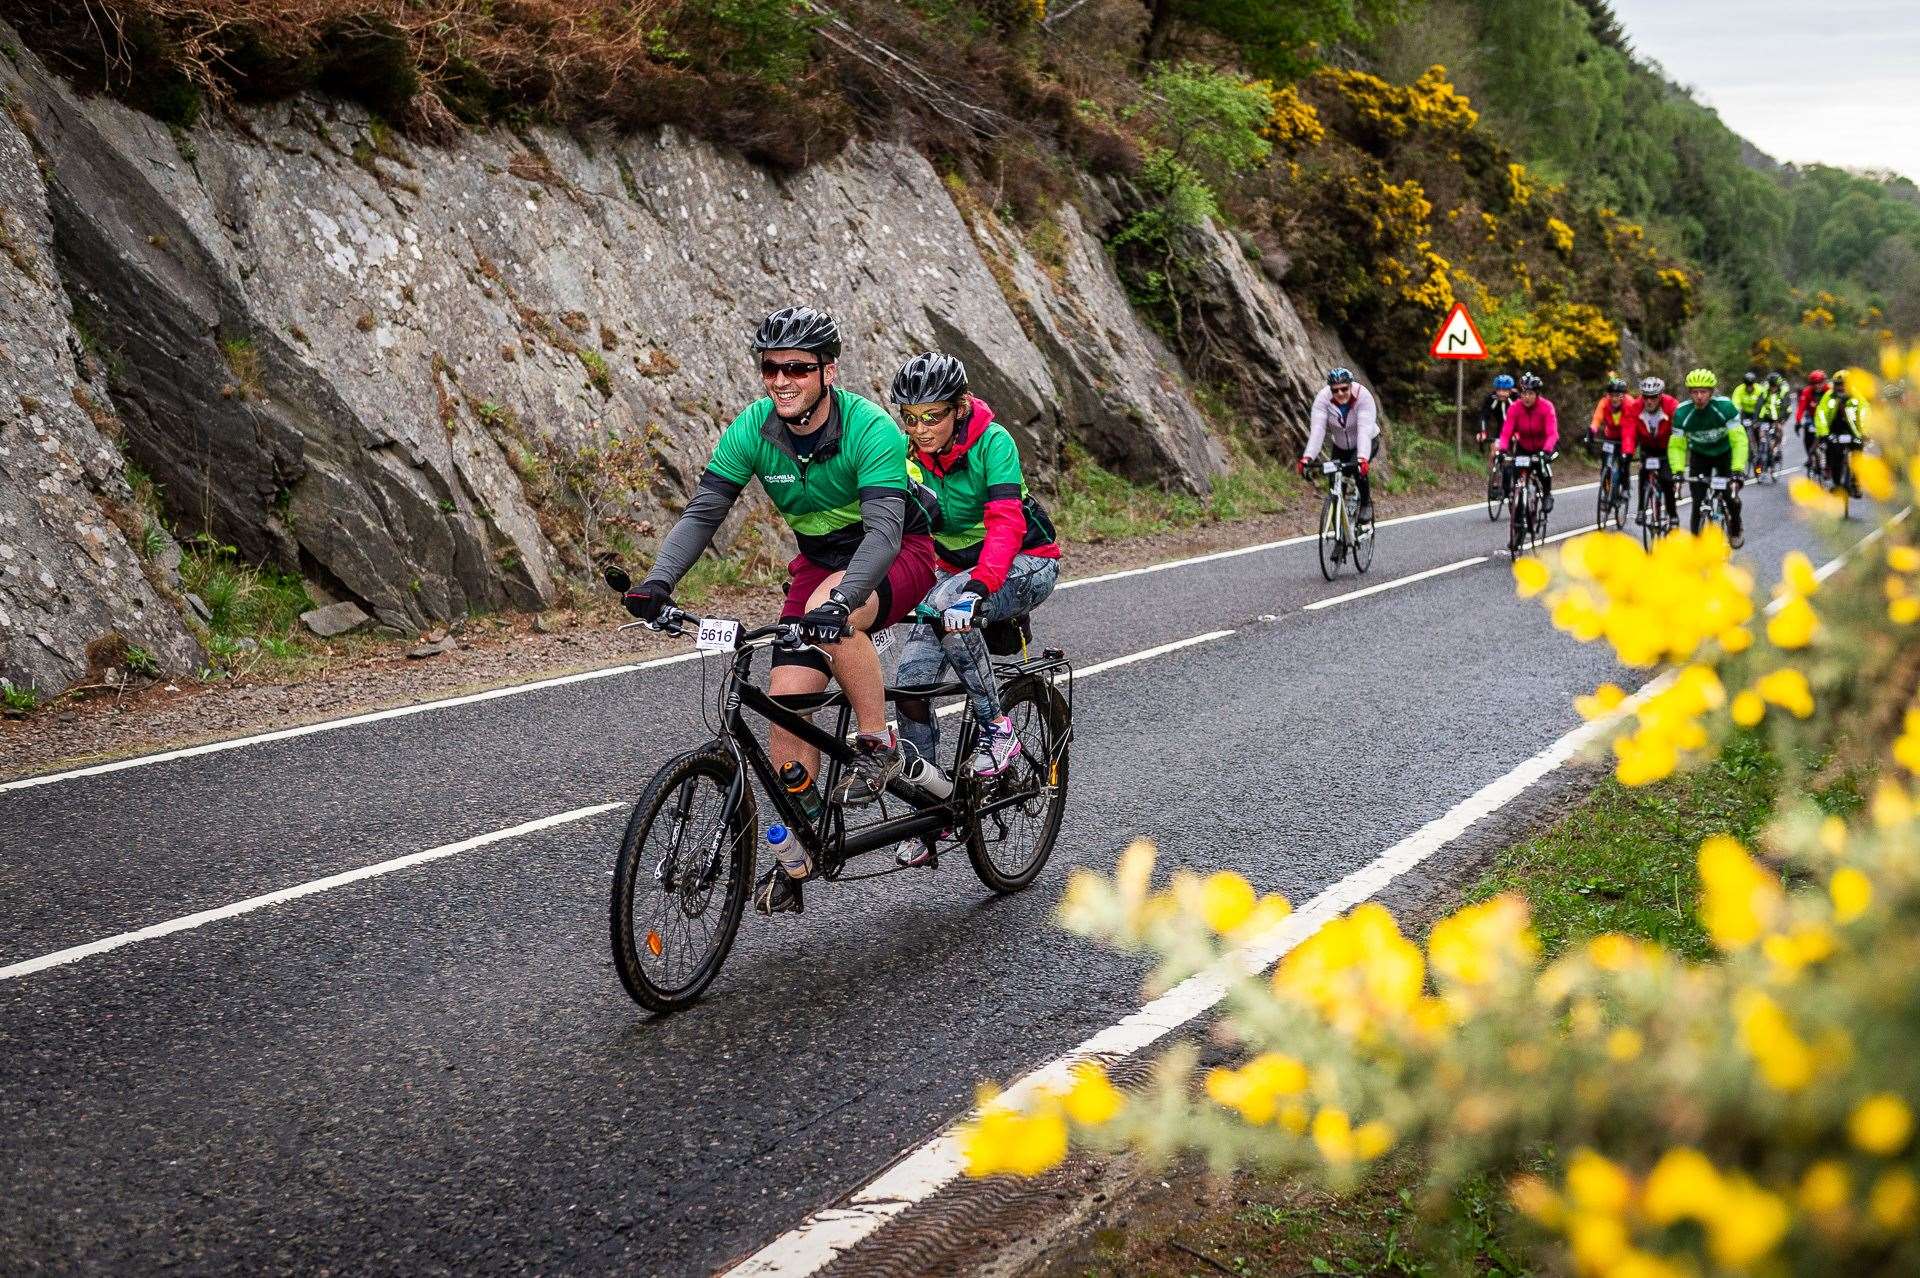 A pair of Macmillan Cancer Support cyclists riding a tandom bike as part of the Etape Loch Ness.